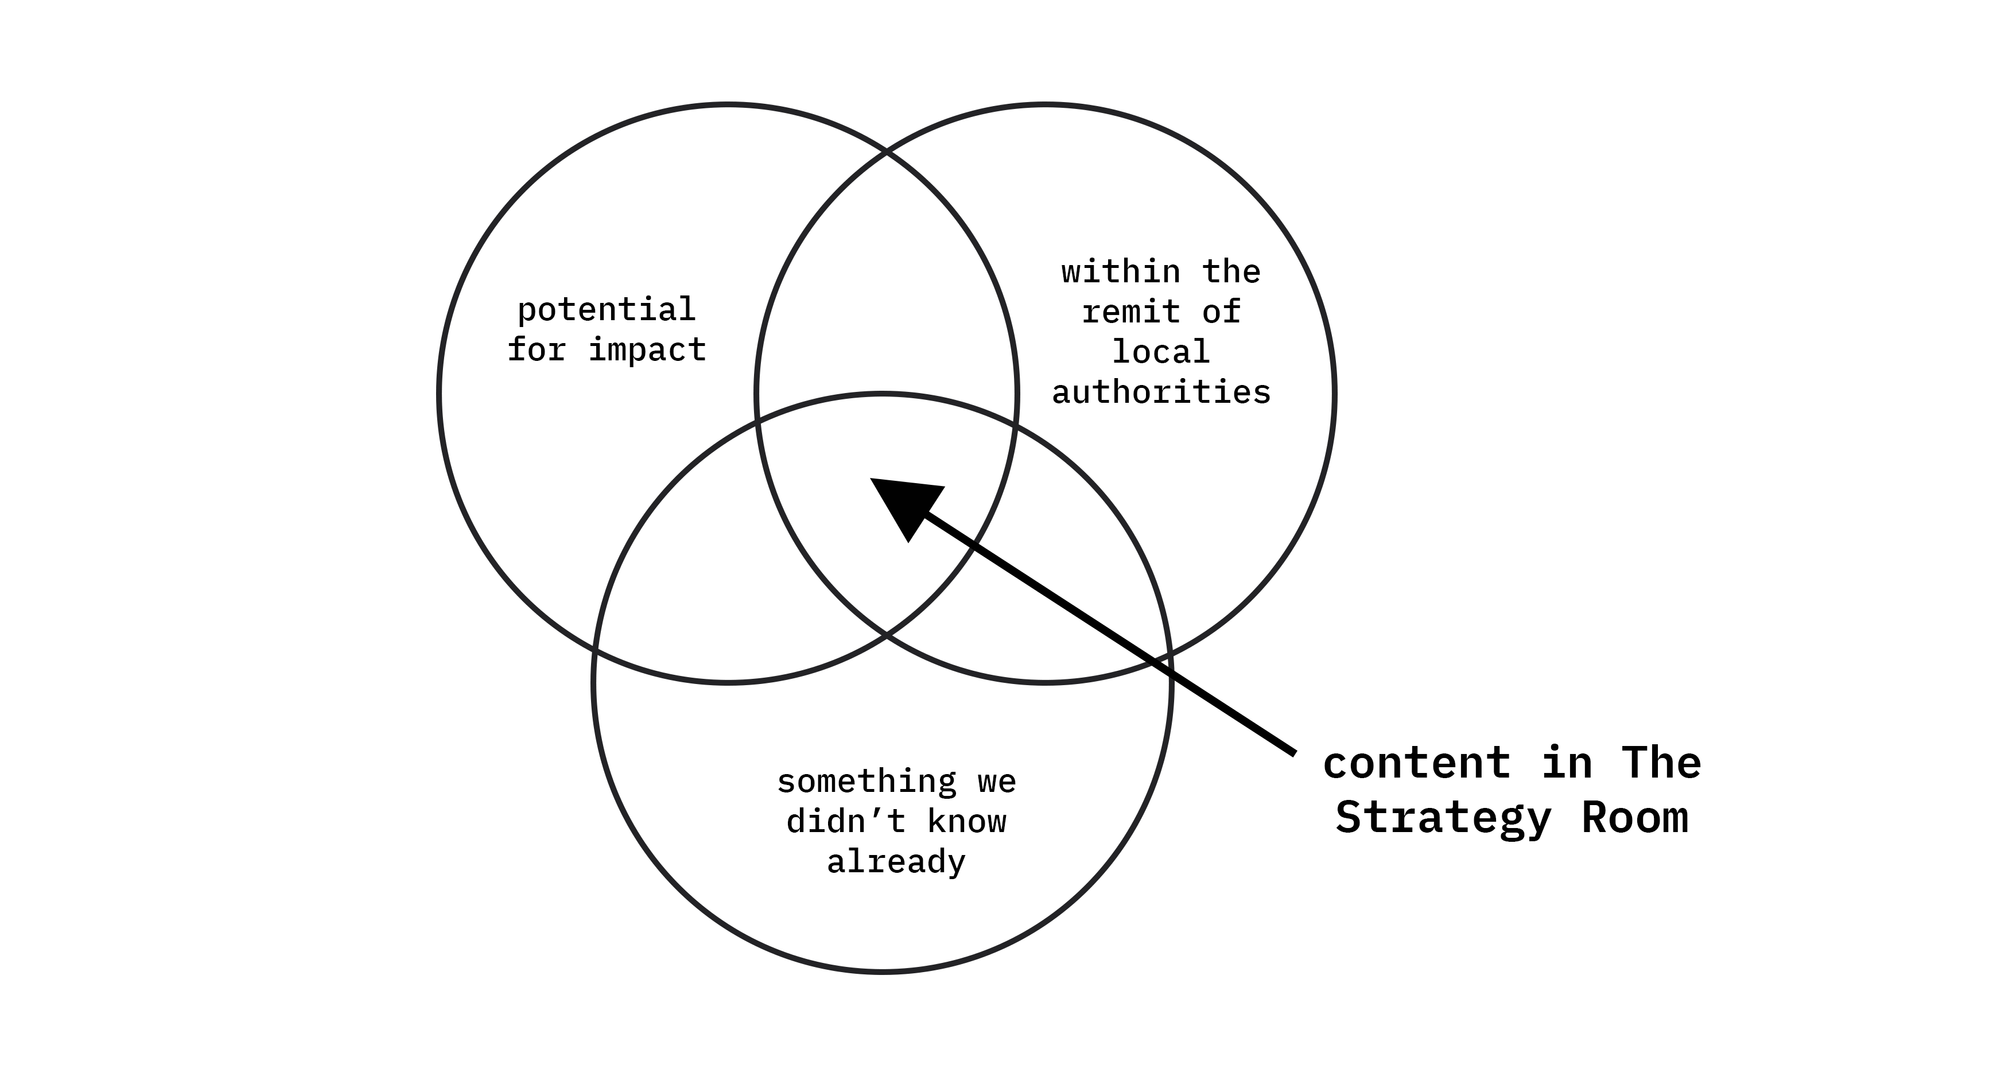 Three interlocking circles labelled 'potential for impact', 'within the remit of local authorities' and 'something we didn't know already'. An arrow points to the centre with the label 'content in The Strategy Roomm'